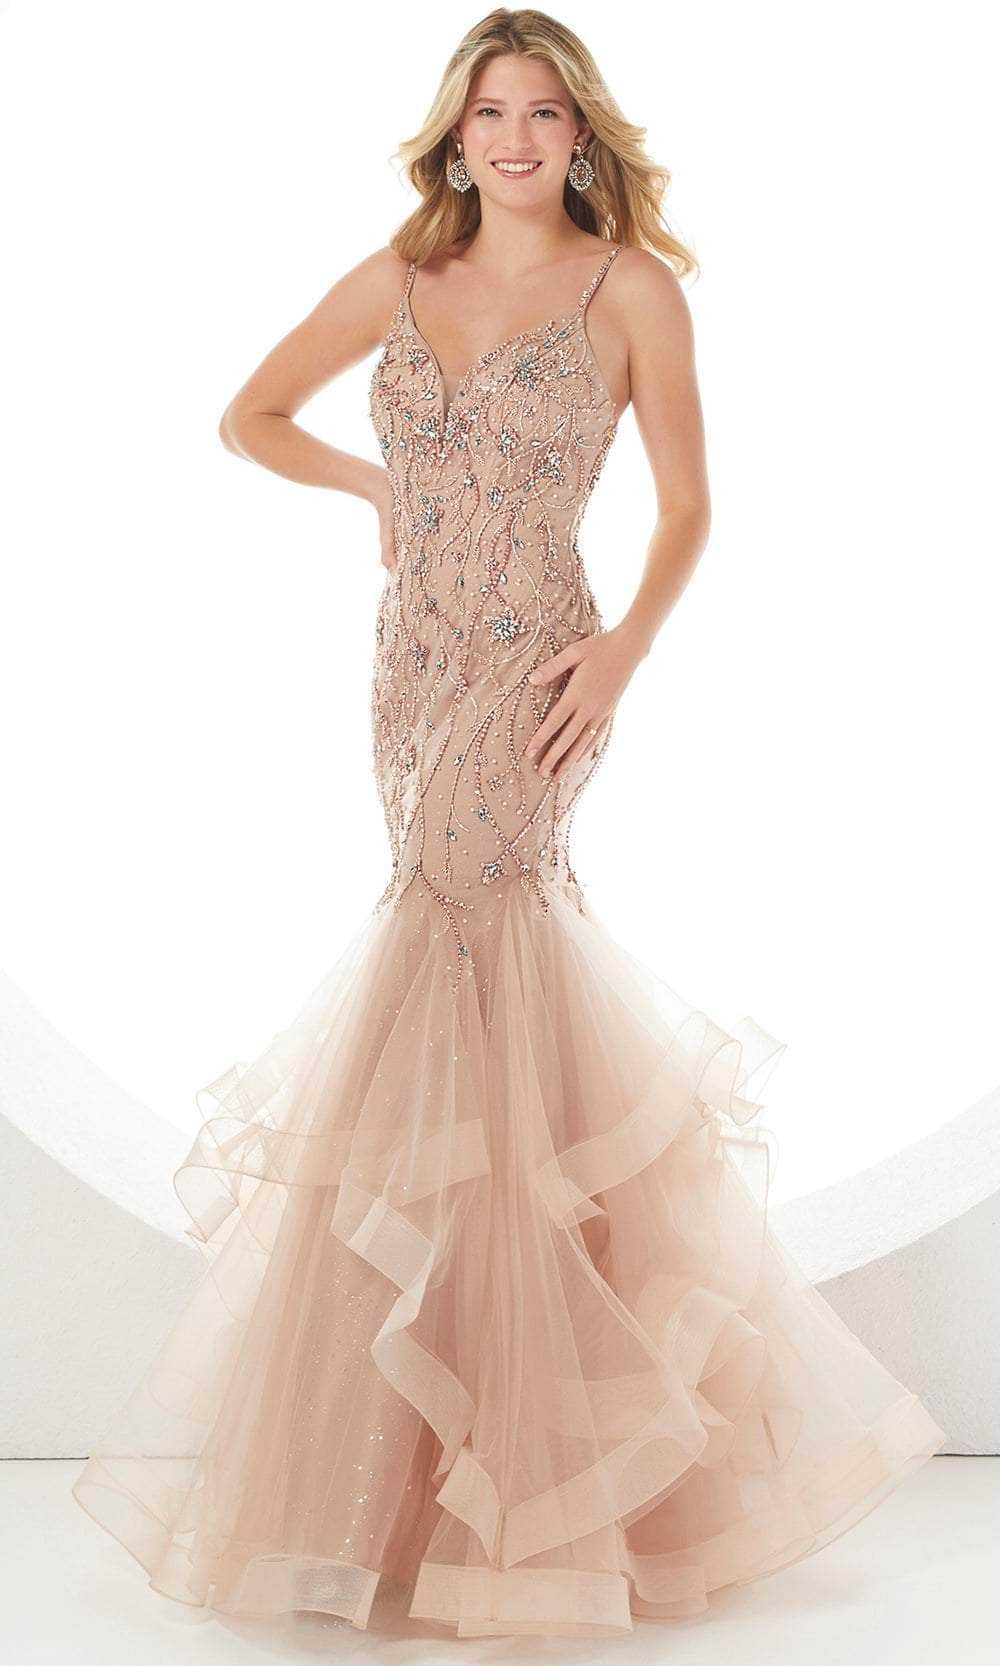 Panoply, Panoply - 14102 Beaded Tulle Mermaid Gown